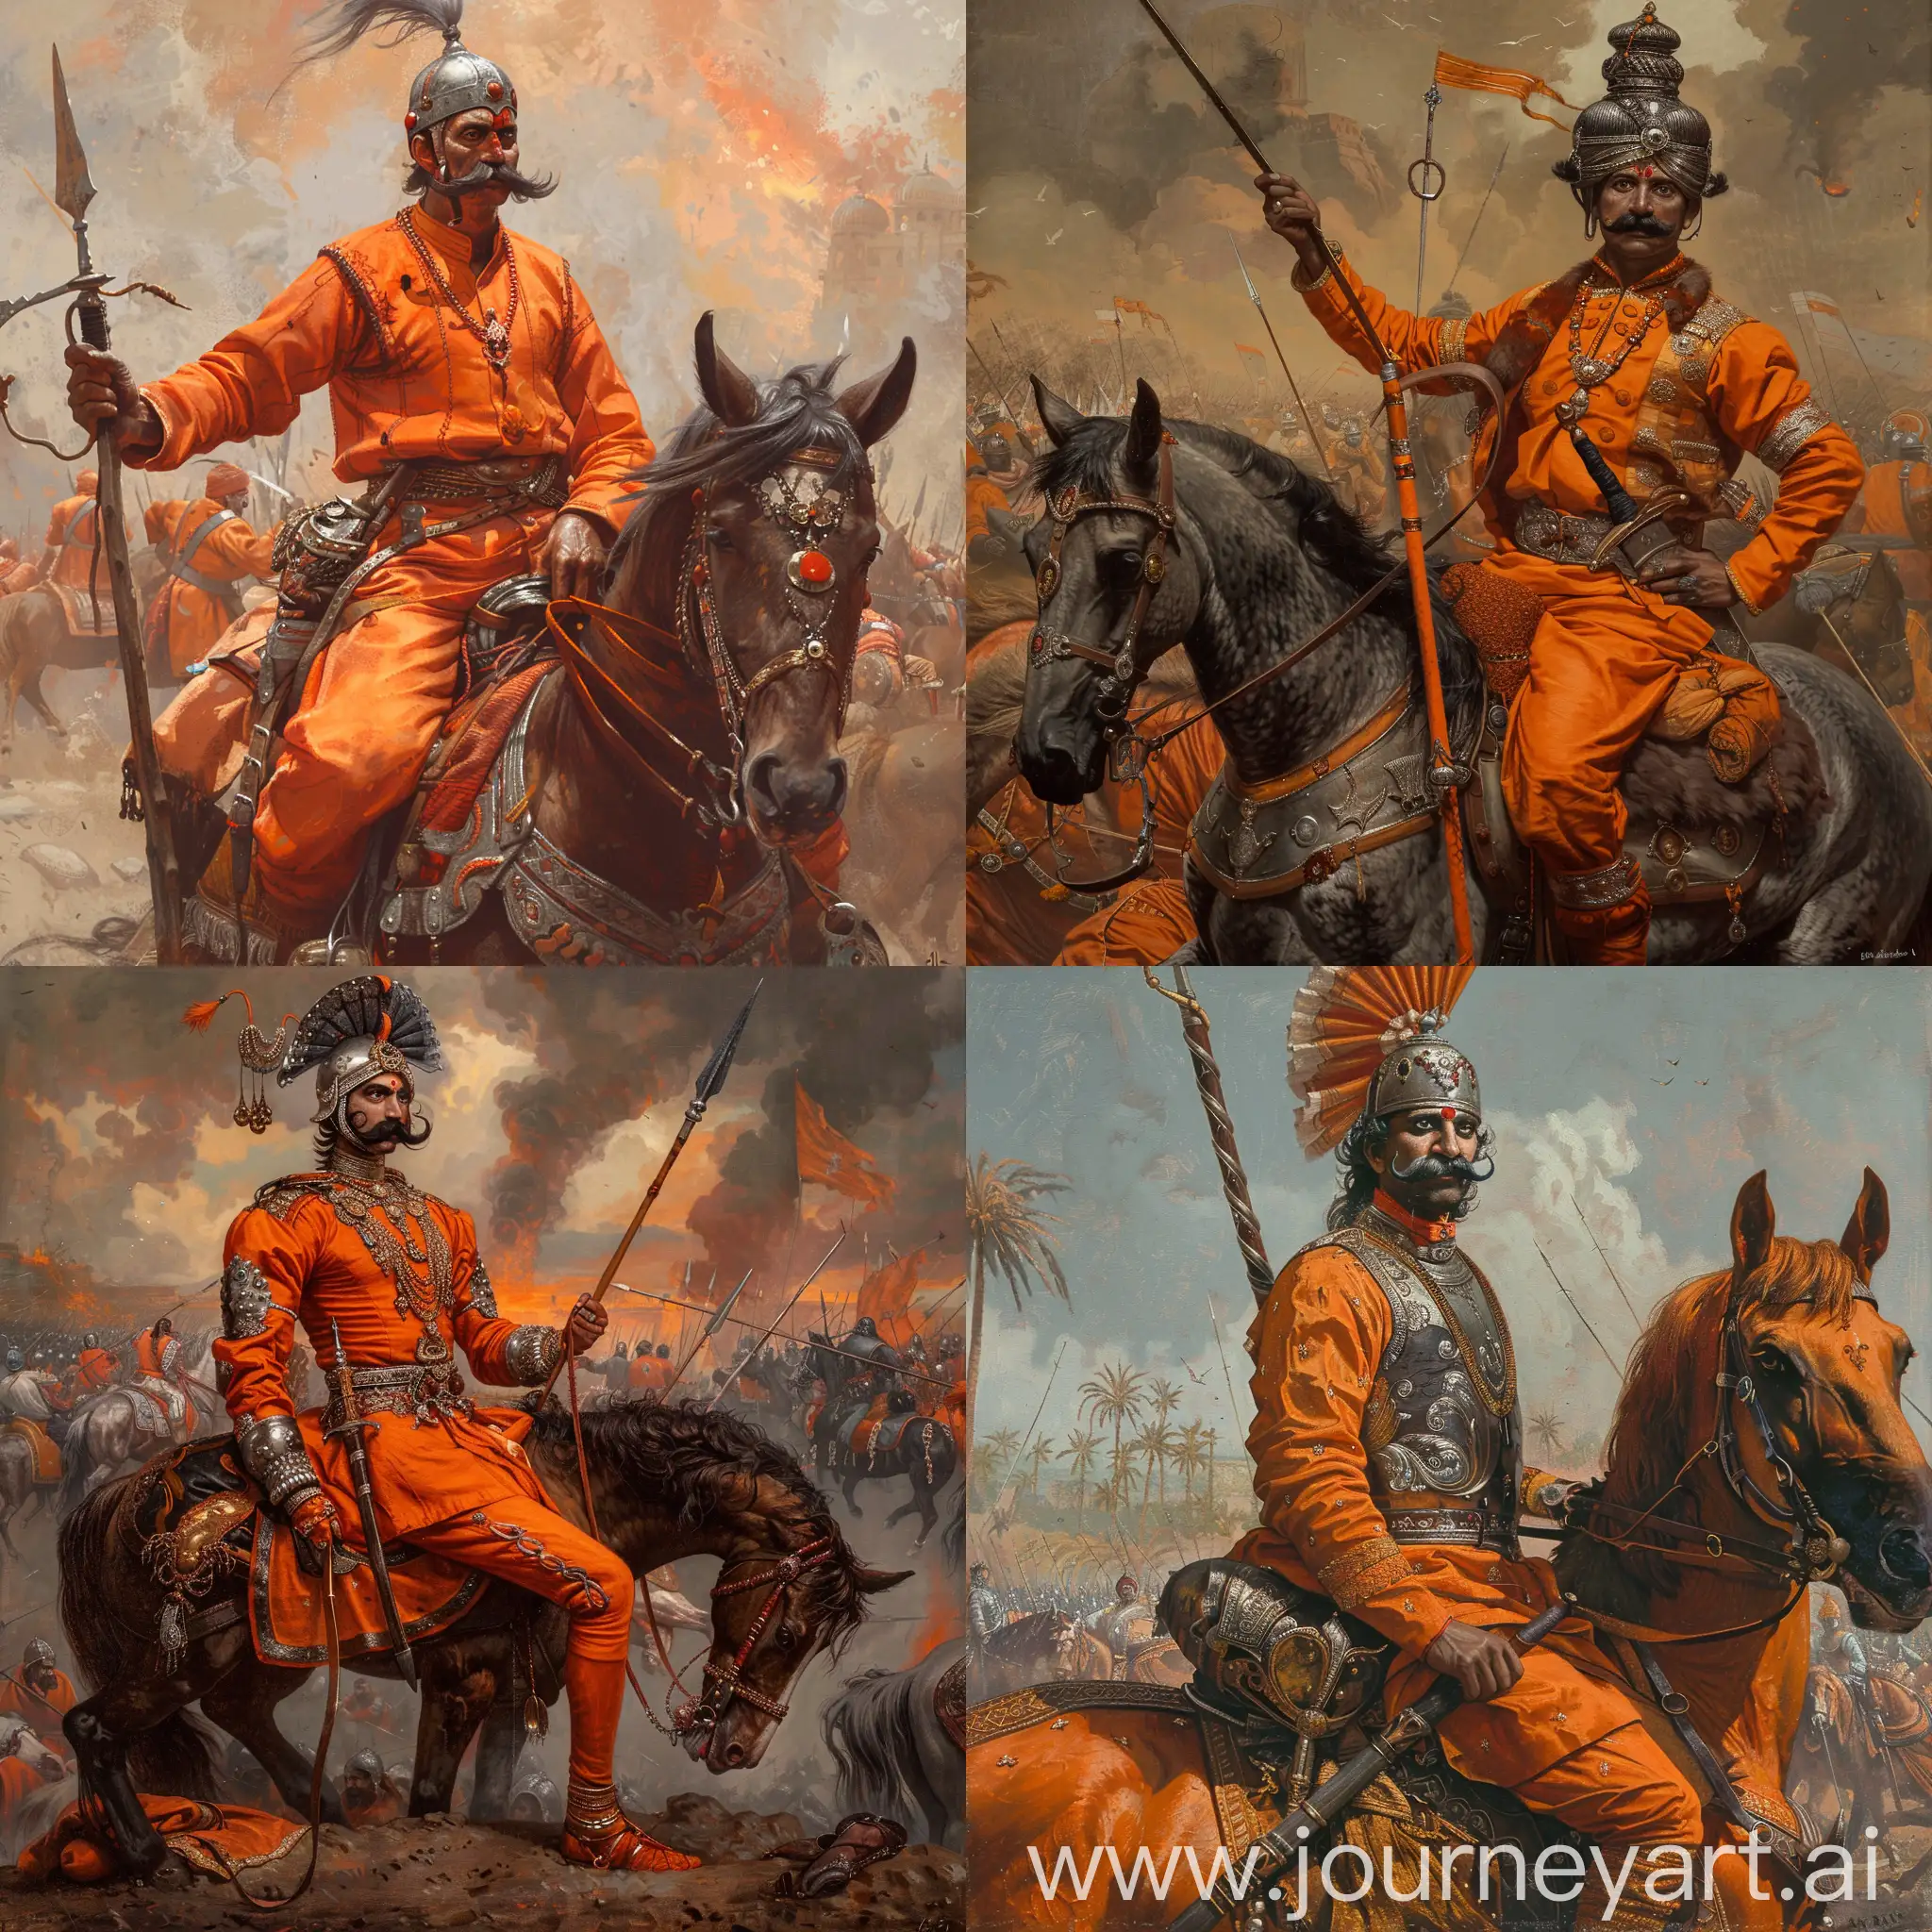 The year is 1600 CE. Imagine a rajput warrior sitting on his horse in a battlefield. The warrior has twirled moustache, cleanshave wearing a spangenhelm on his head. He is wearing orange uniform with armor. He has a lance in his hand and sheathed sword by his side.